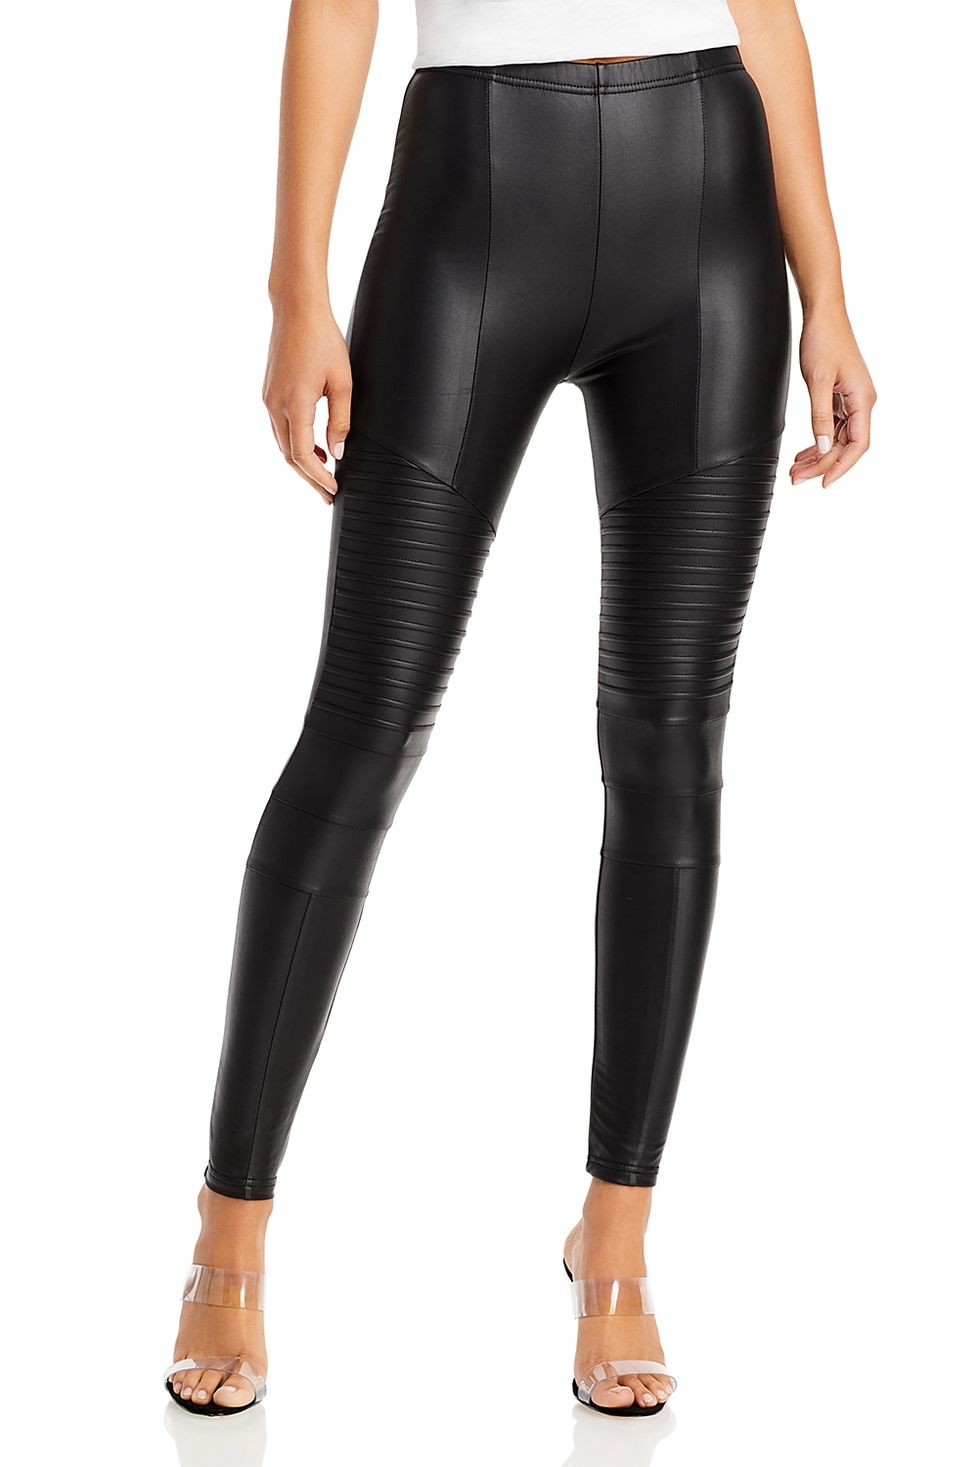 Women's Fleece Lined Leggings Faux Leather High Waisted Comfy Trendy  Leather Pants Warm Thermal Leggings